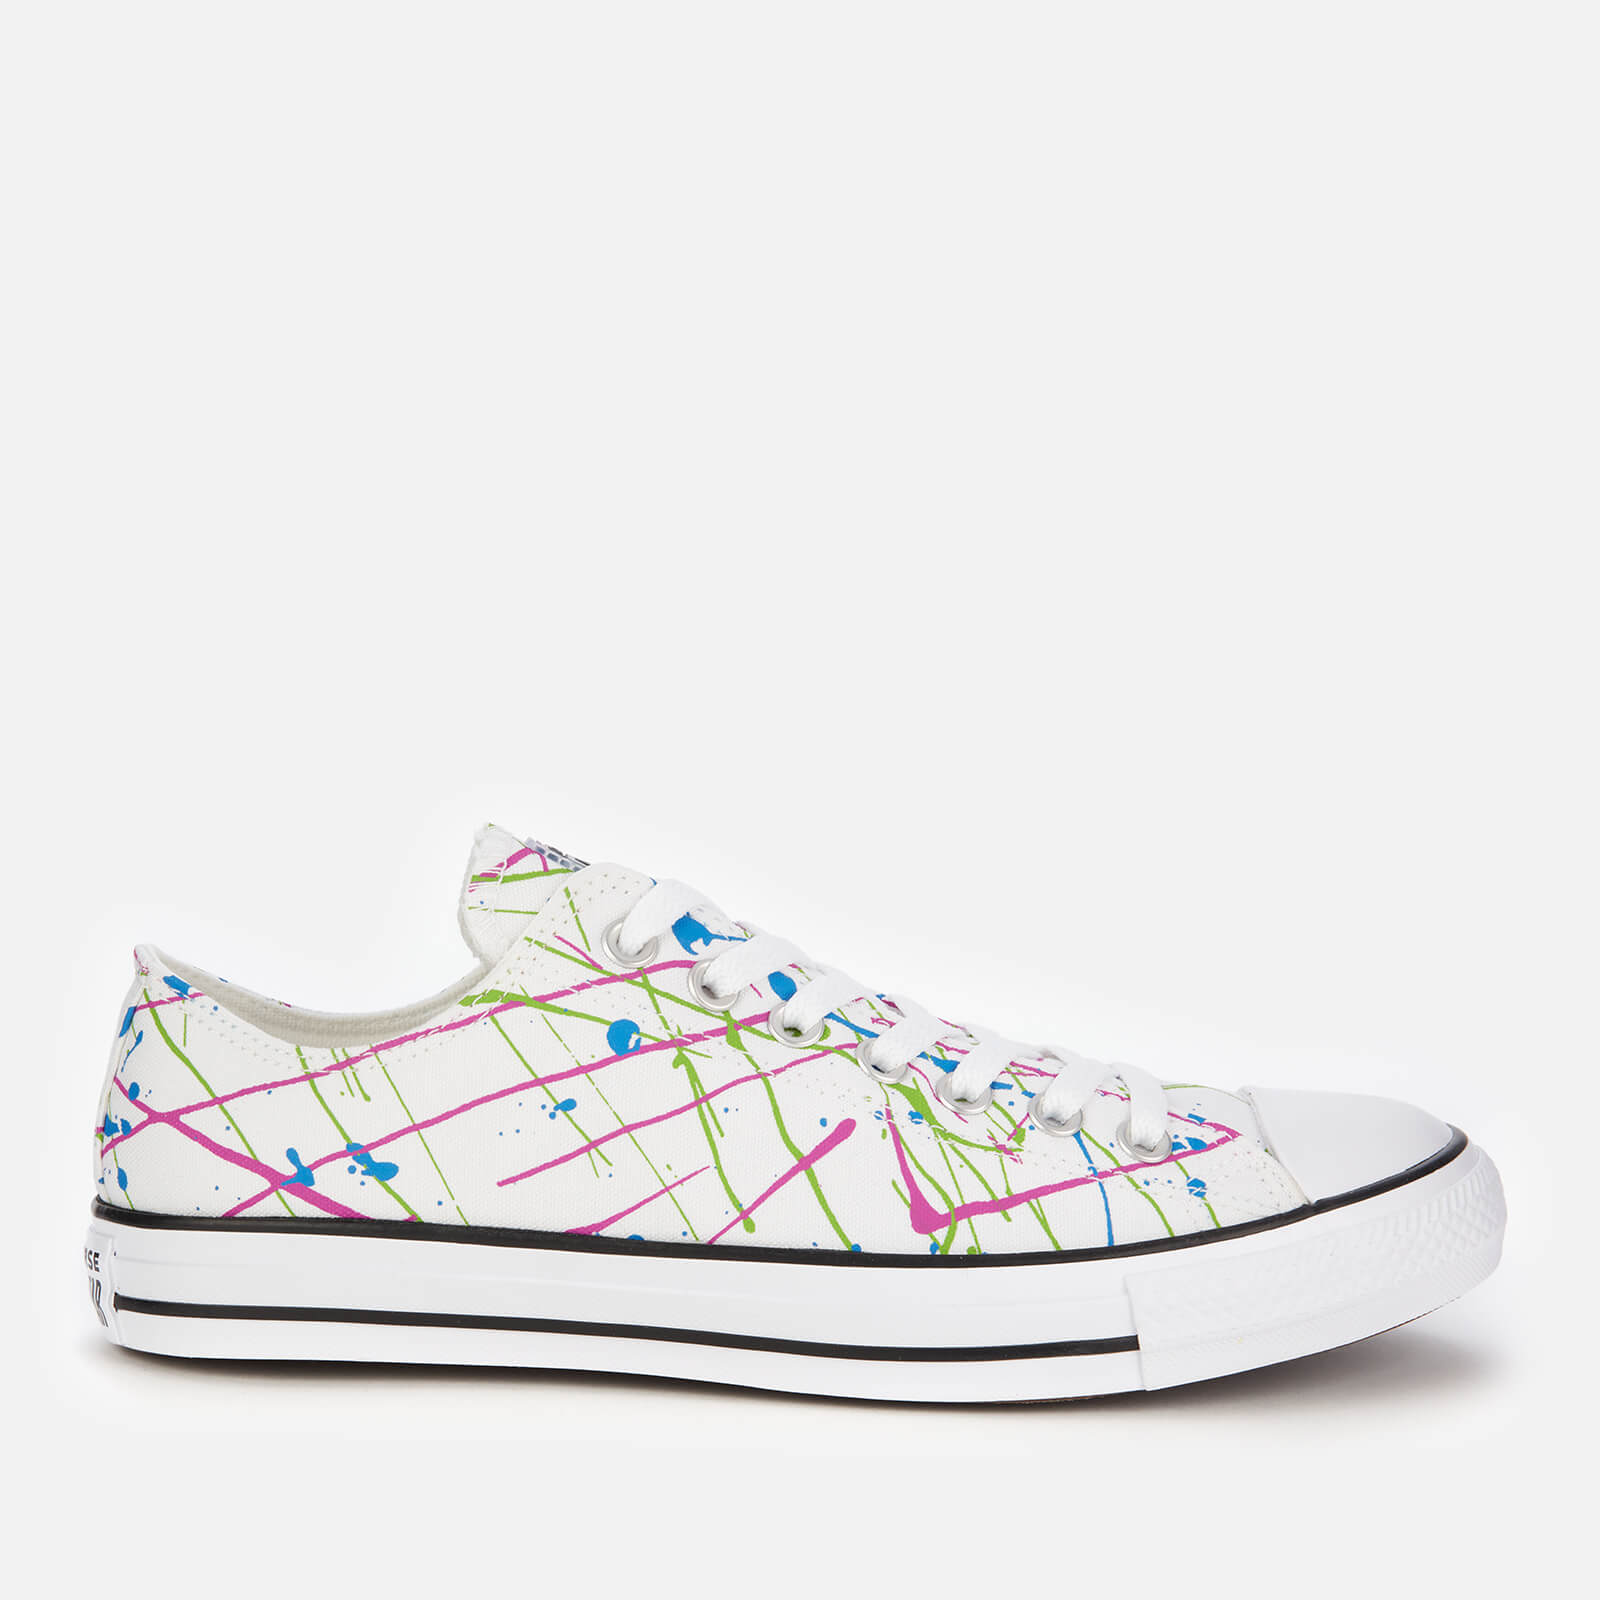 Converse Men's Chuck Taylor All Star Archive Paint Splatter Print Ox Trainers - White - UK 7